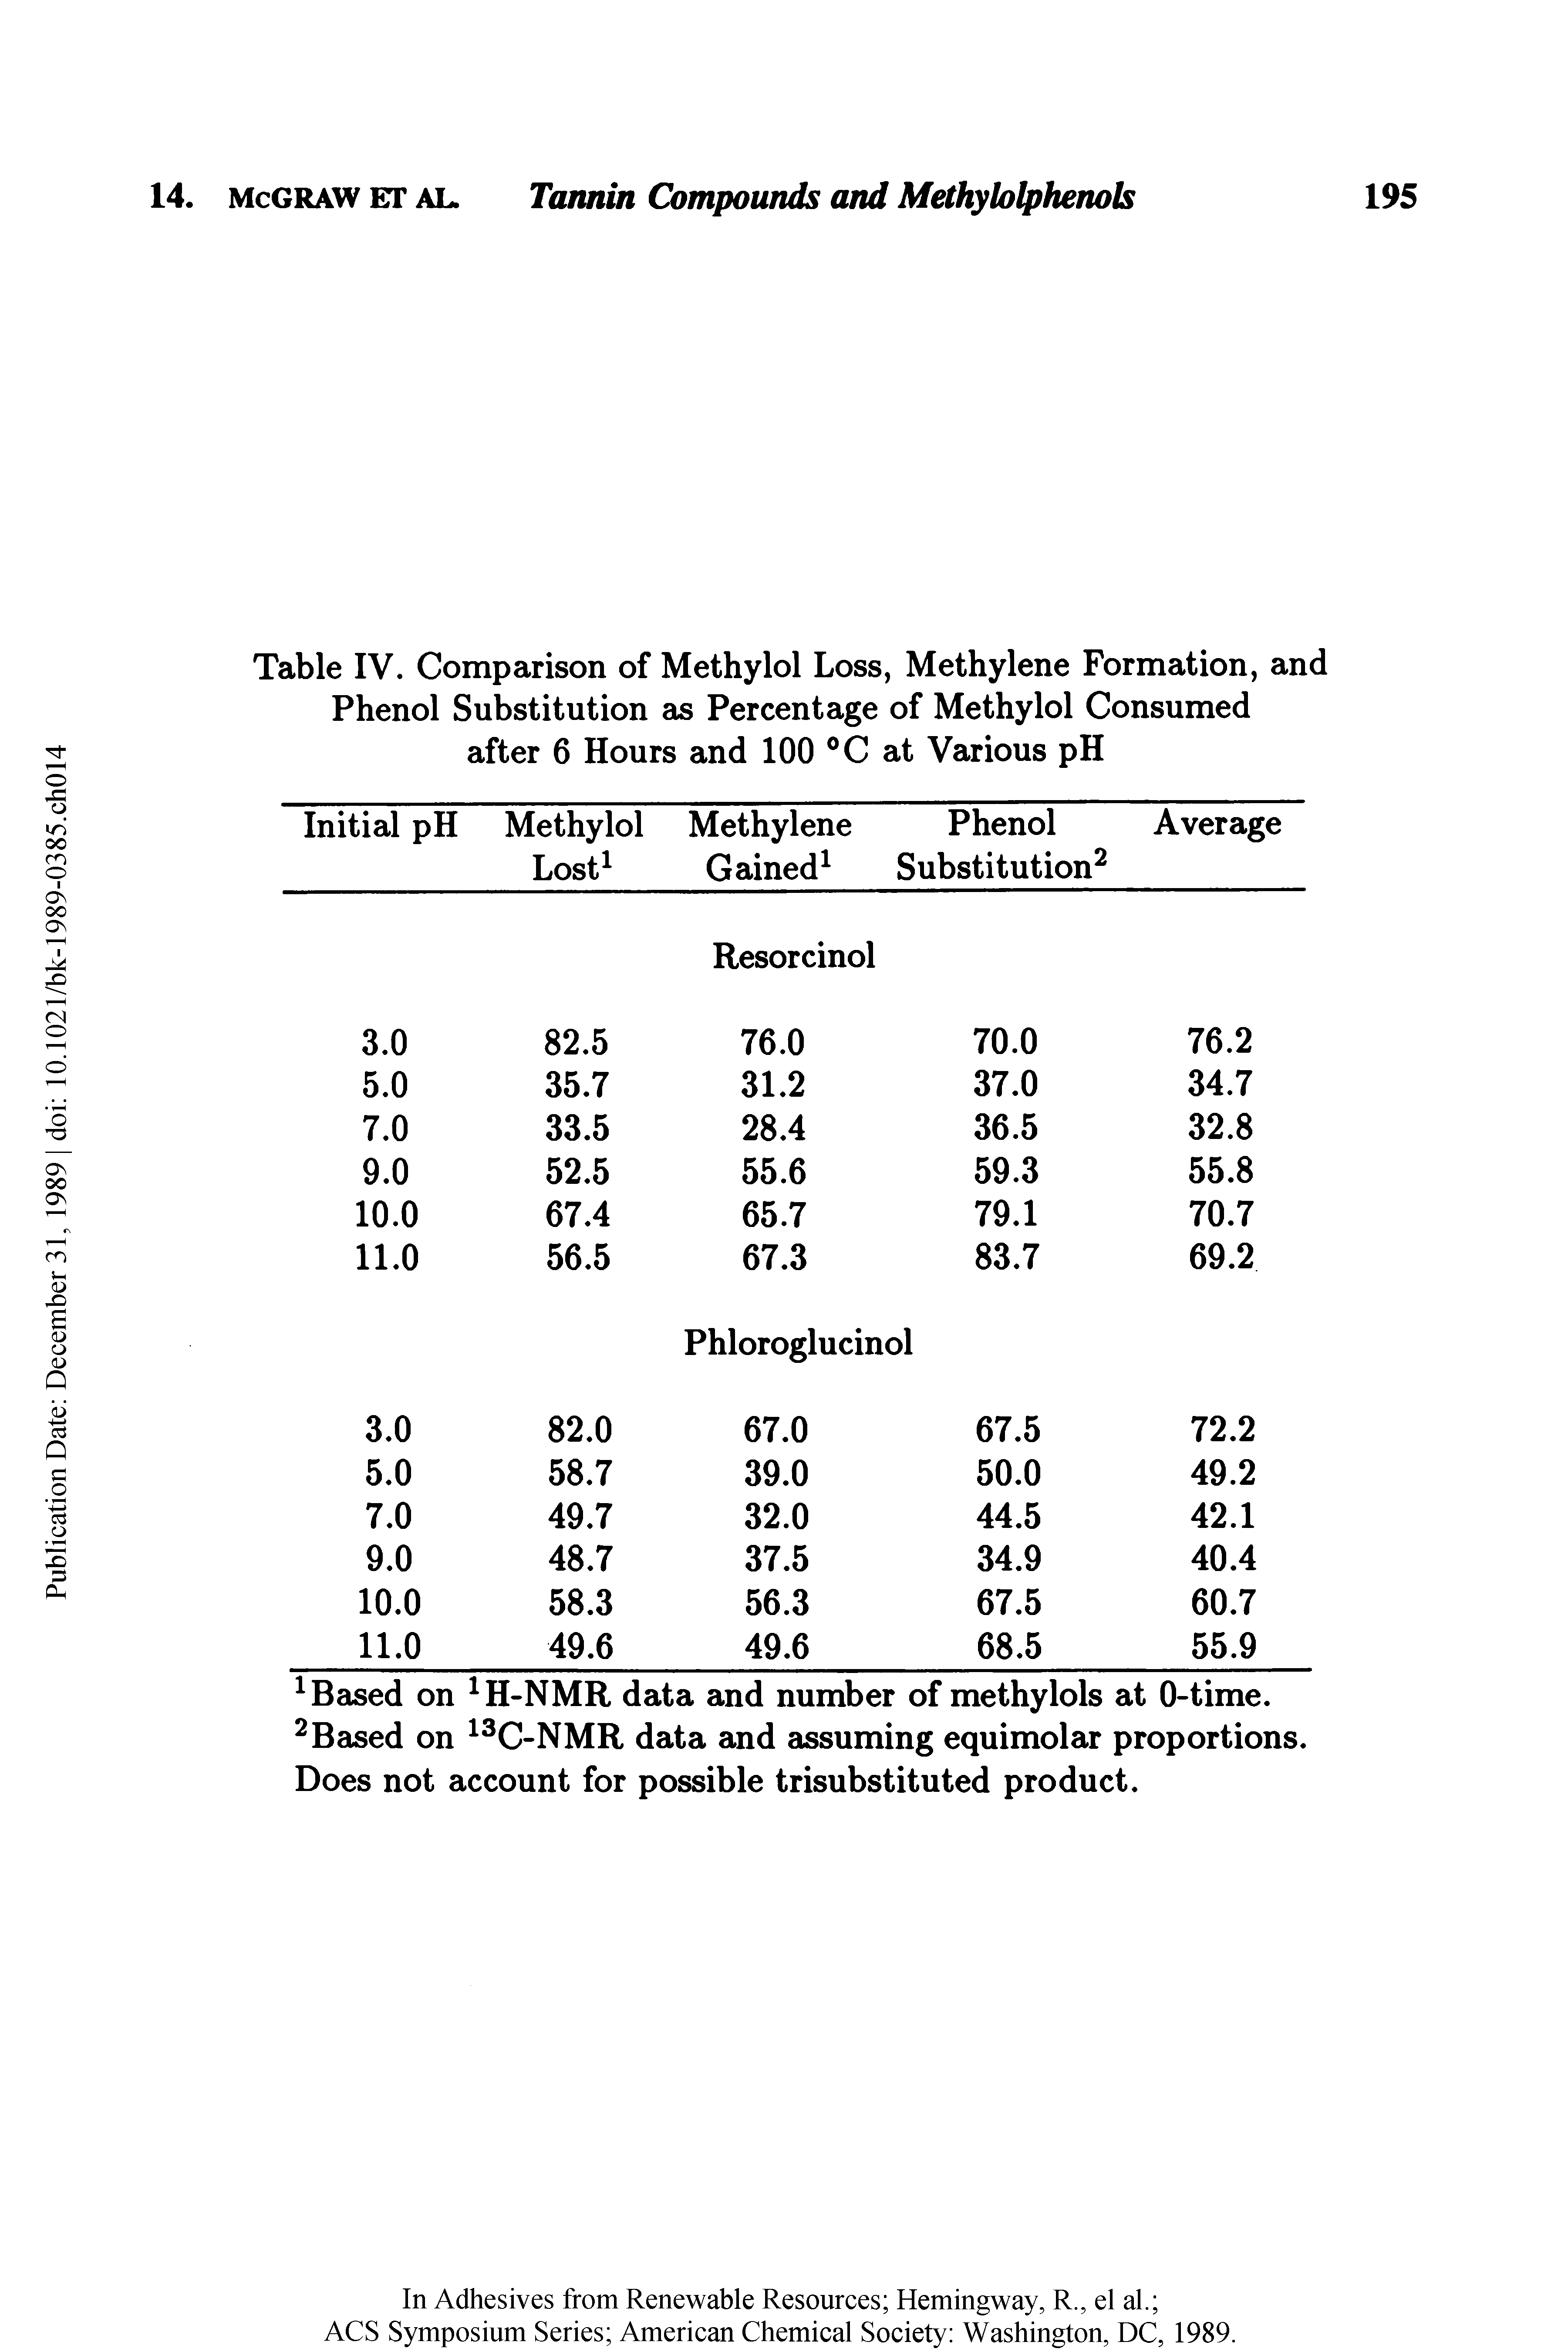 Table IV. Comparison of Methylol Loss, Methylene Formation, and Phenol Substitution as Percentage of Methylol Consumed after 6 Hours and 100 °C at Various pH...